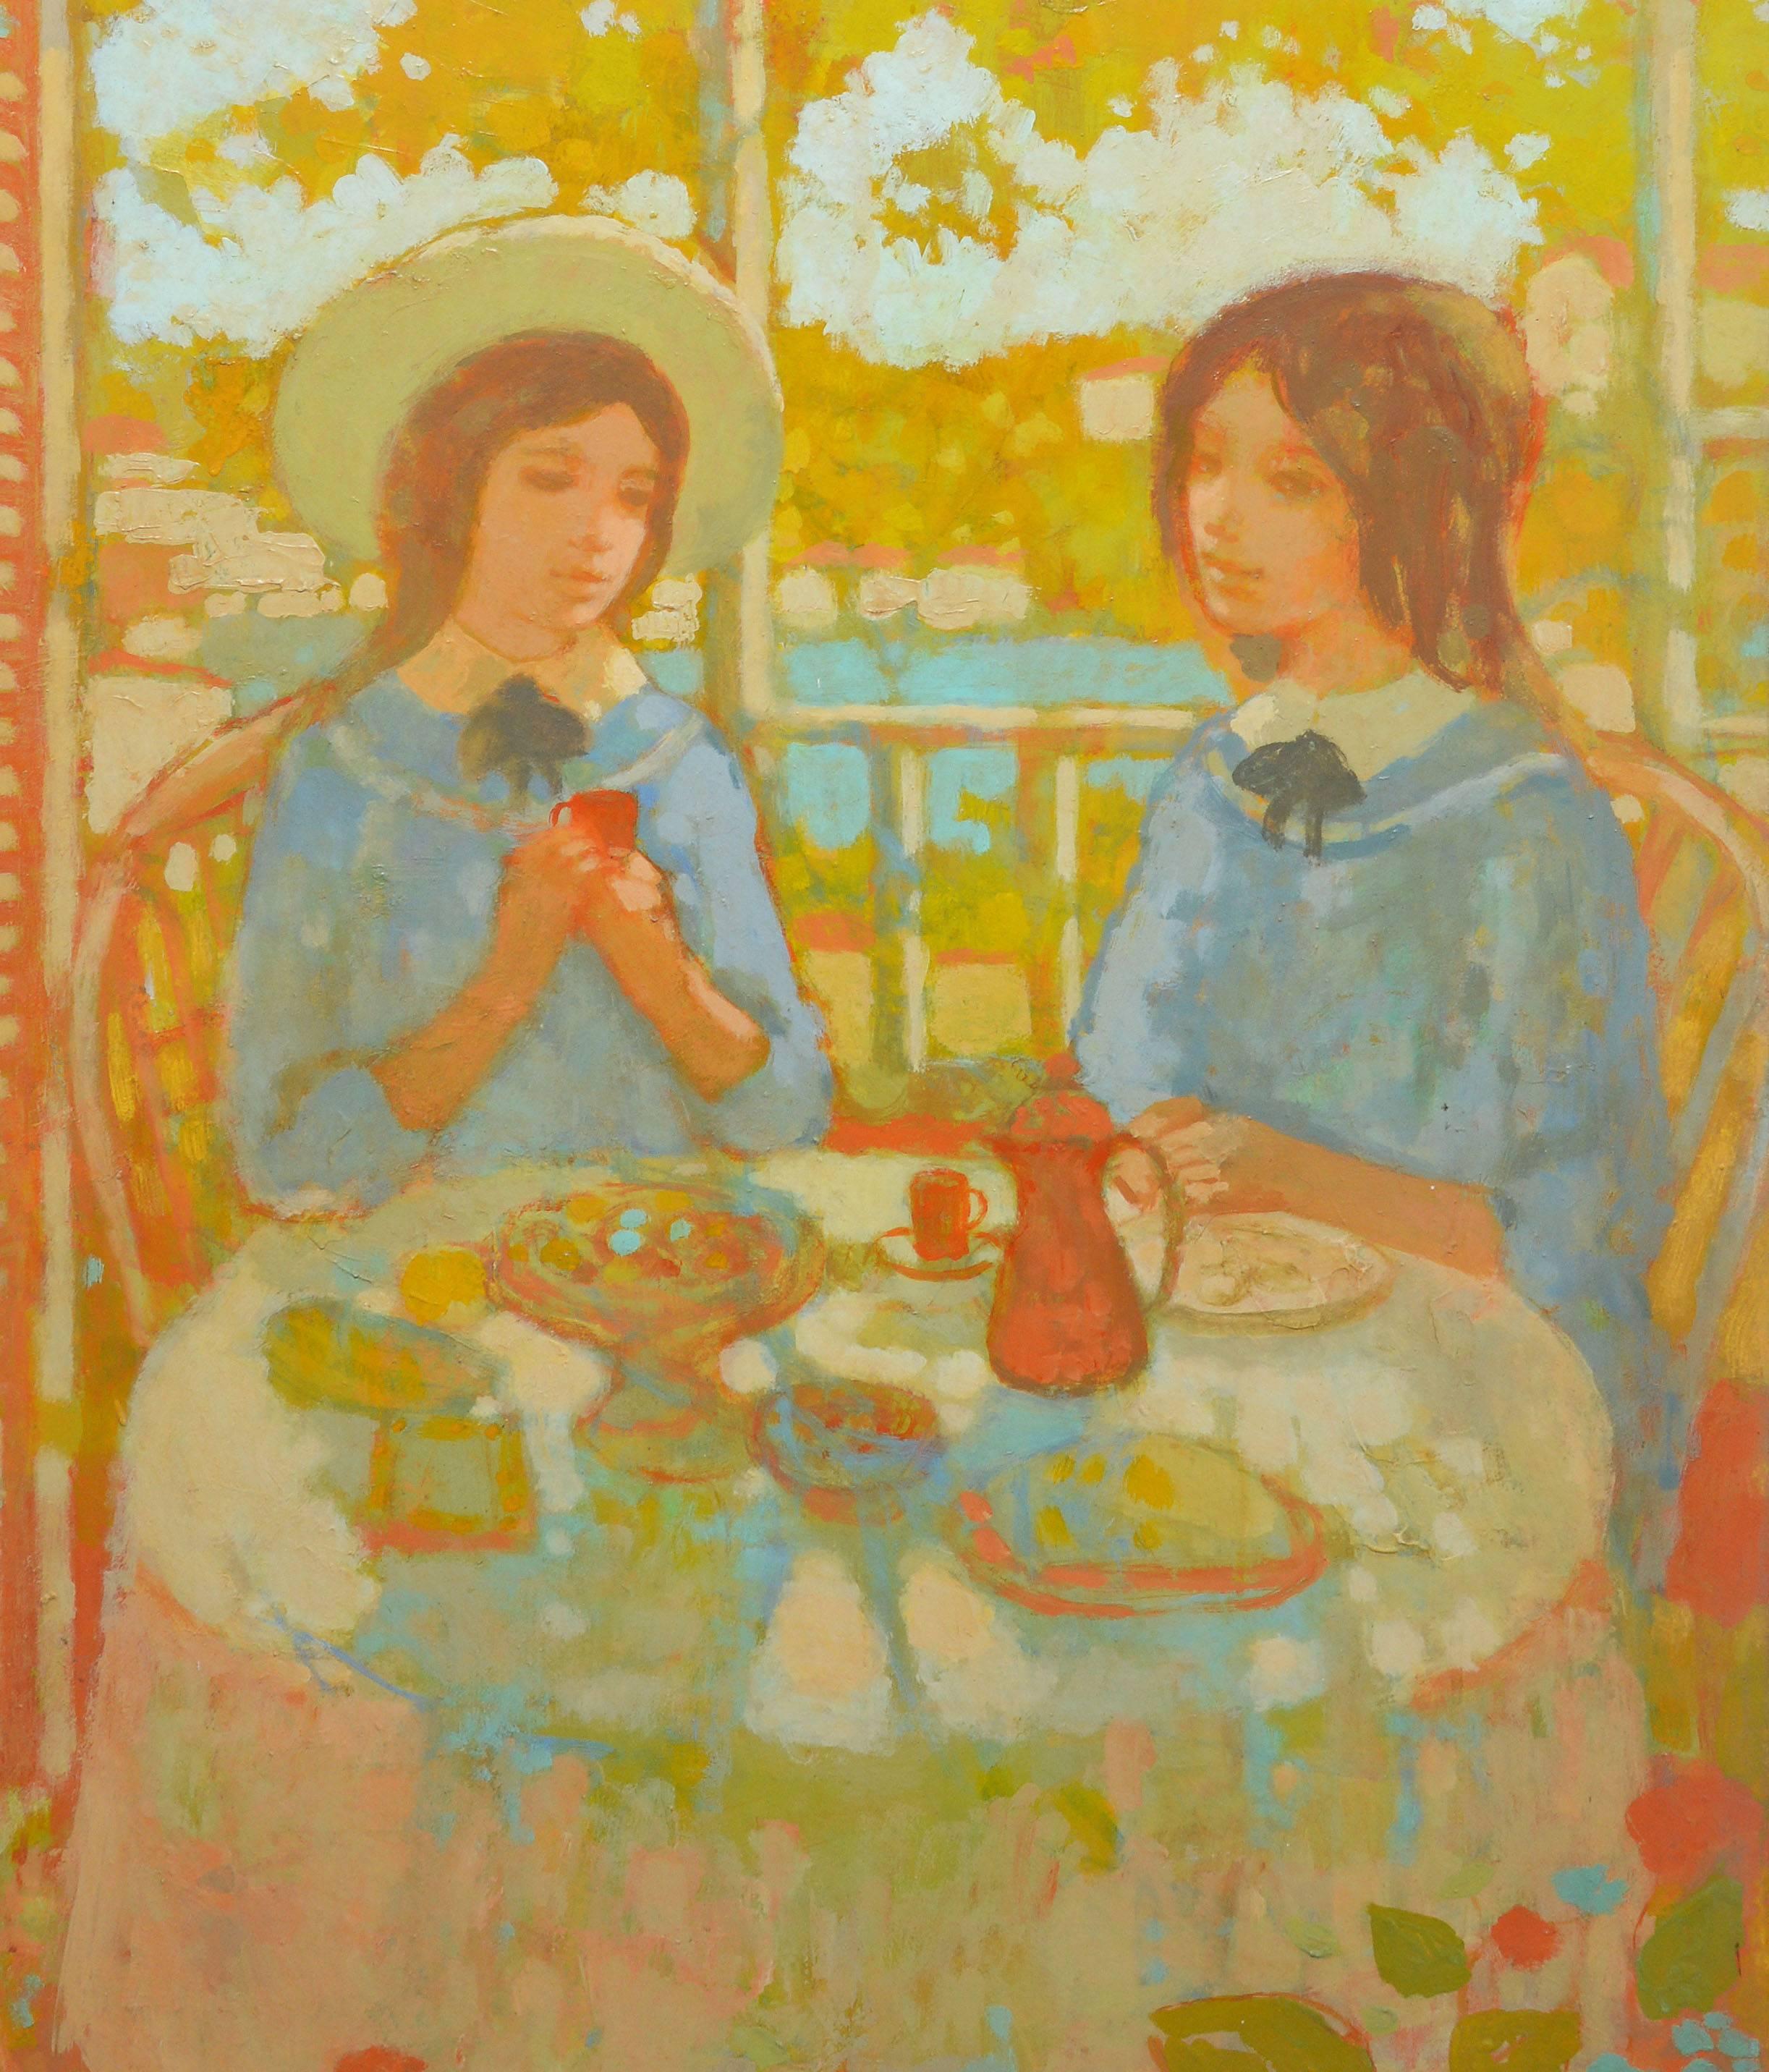 Impressionist painting of two women on a balcony by Enzo Russo. Oil on canvas, circa 1972. Signed lower left, "E. Russo". Displayed in a whitewood frame.  Image size, 24"L x 36"H, overall 32"L x 44"H
